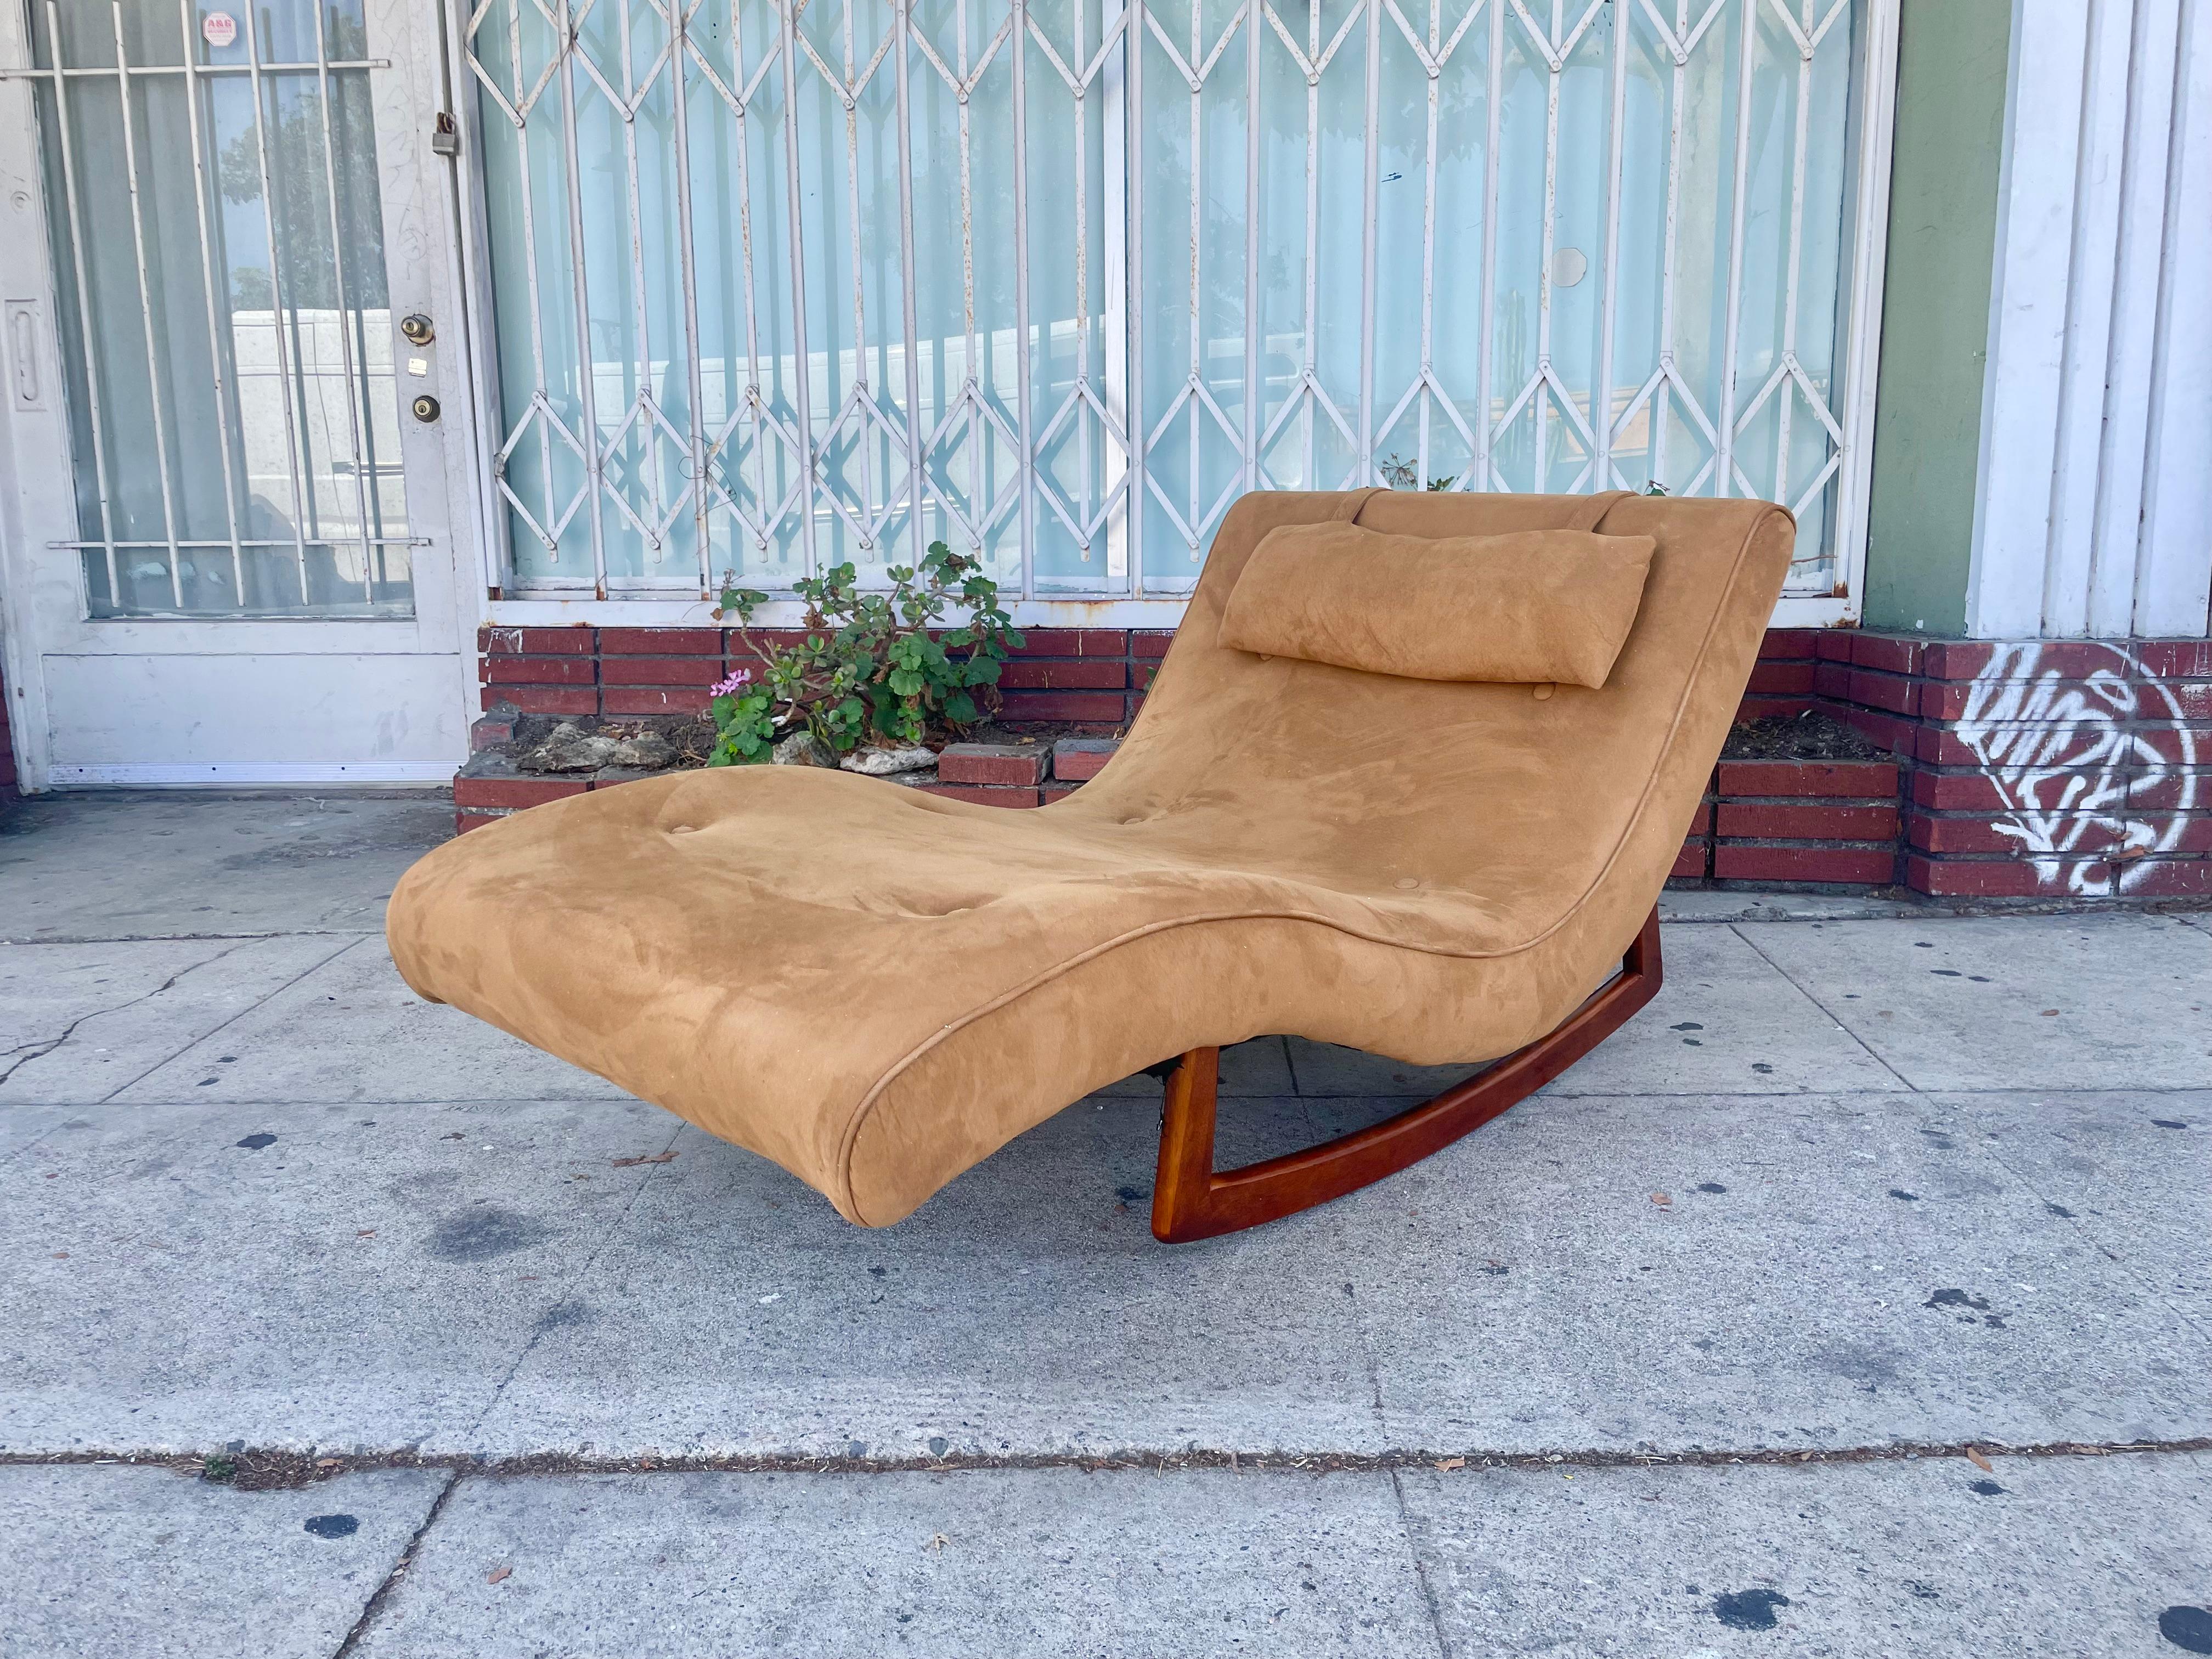 Beautiful mid-century wavy rocker styled after Adrian Pearsall design and manufactured in the United States circa 1960s. This beautiful wavy chaise lounge features a walnut base with beautiful brown upholstery, guaranteed to draw attention in any